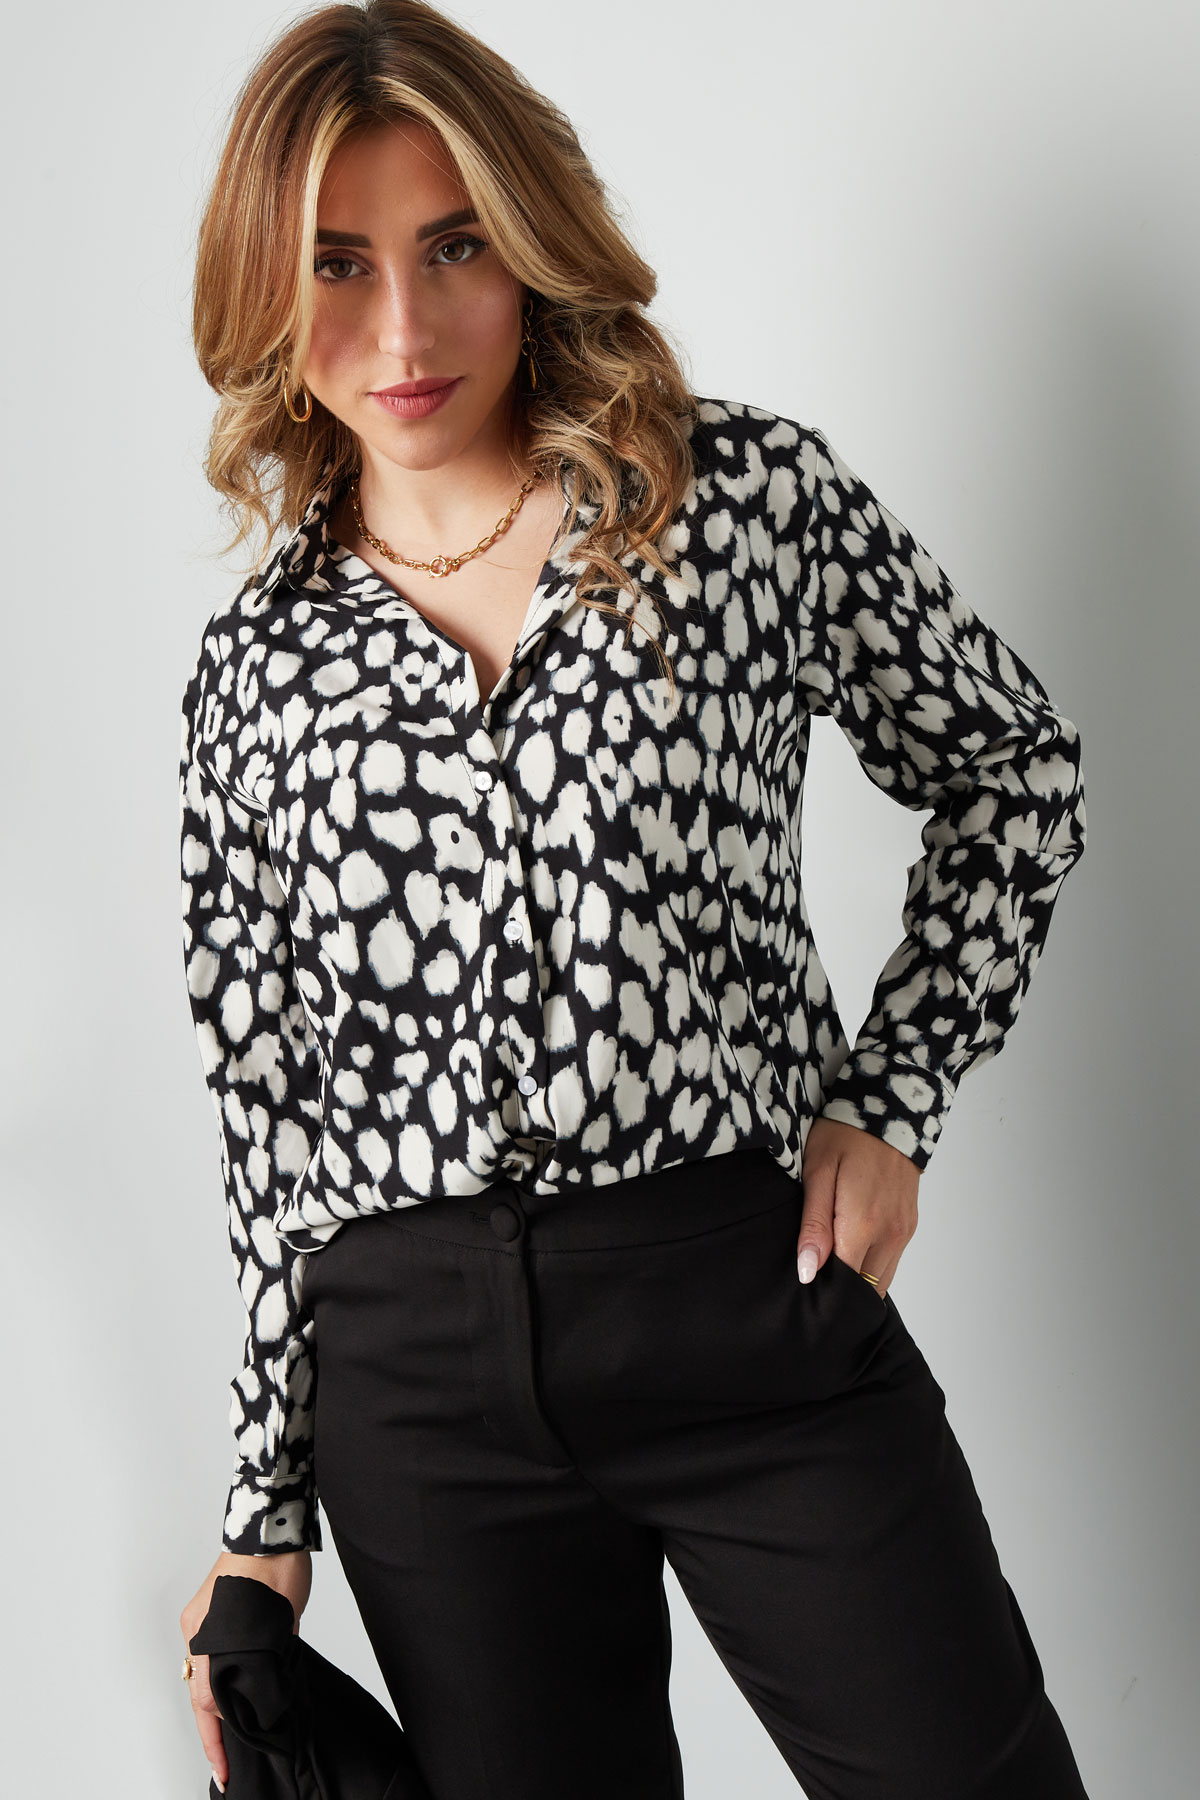 Leopard print blouse black and white Picture4